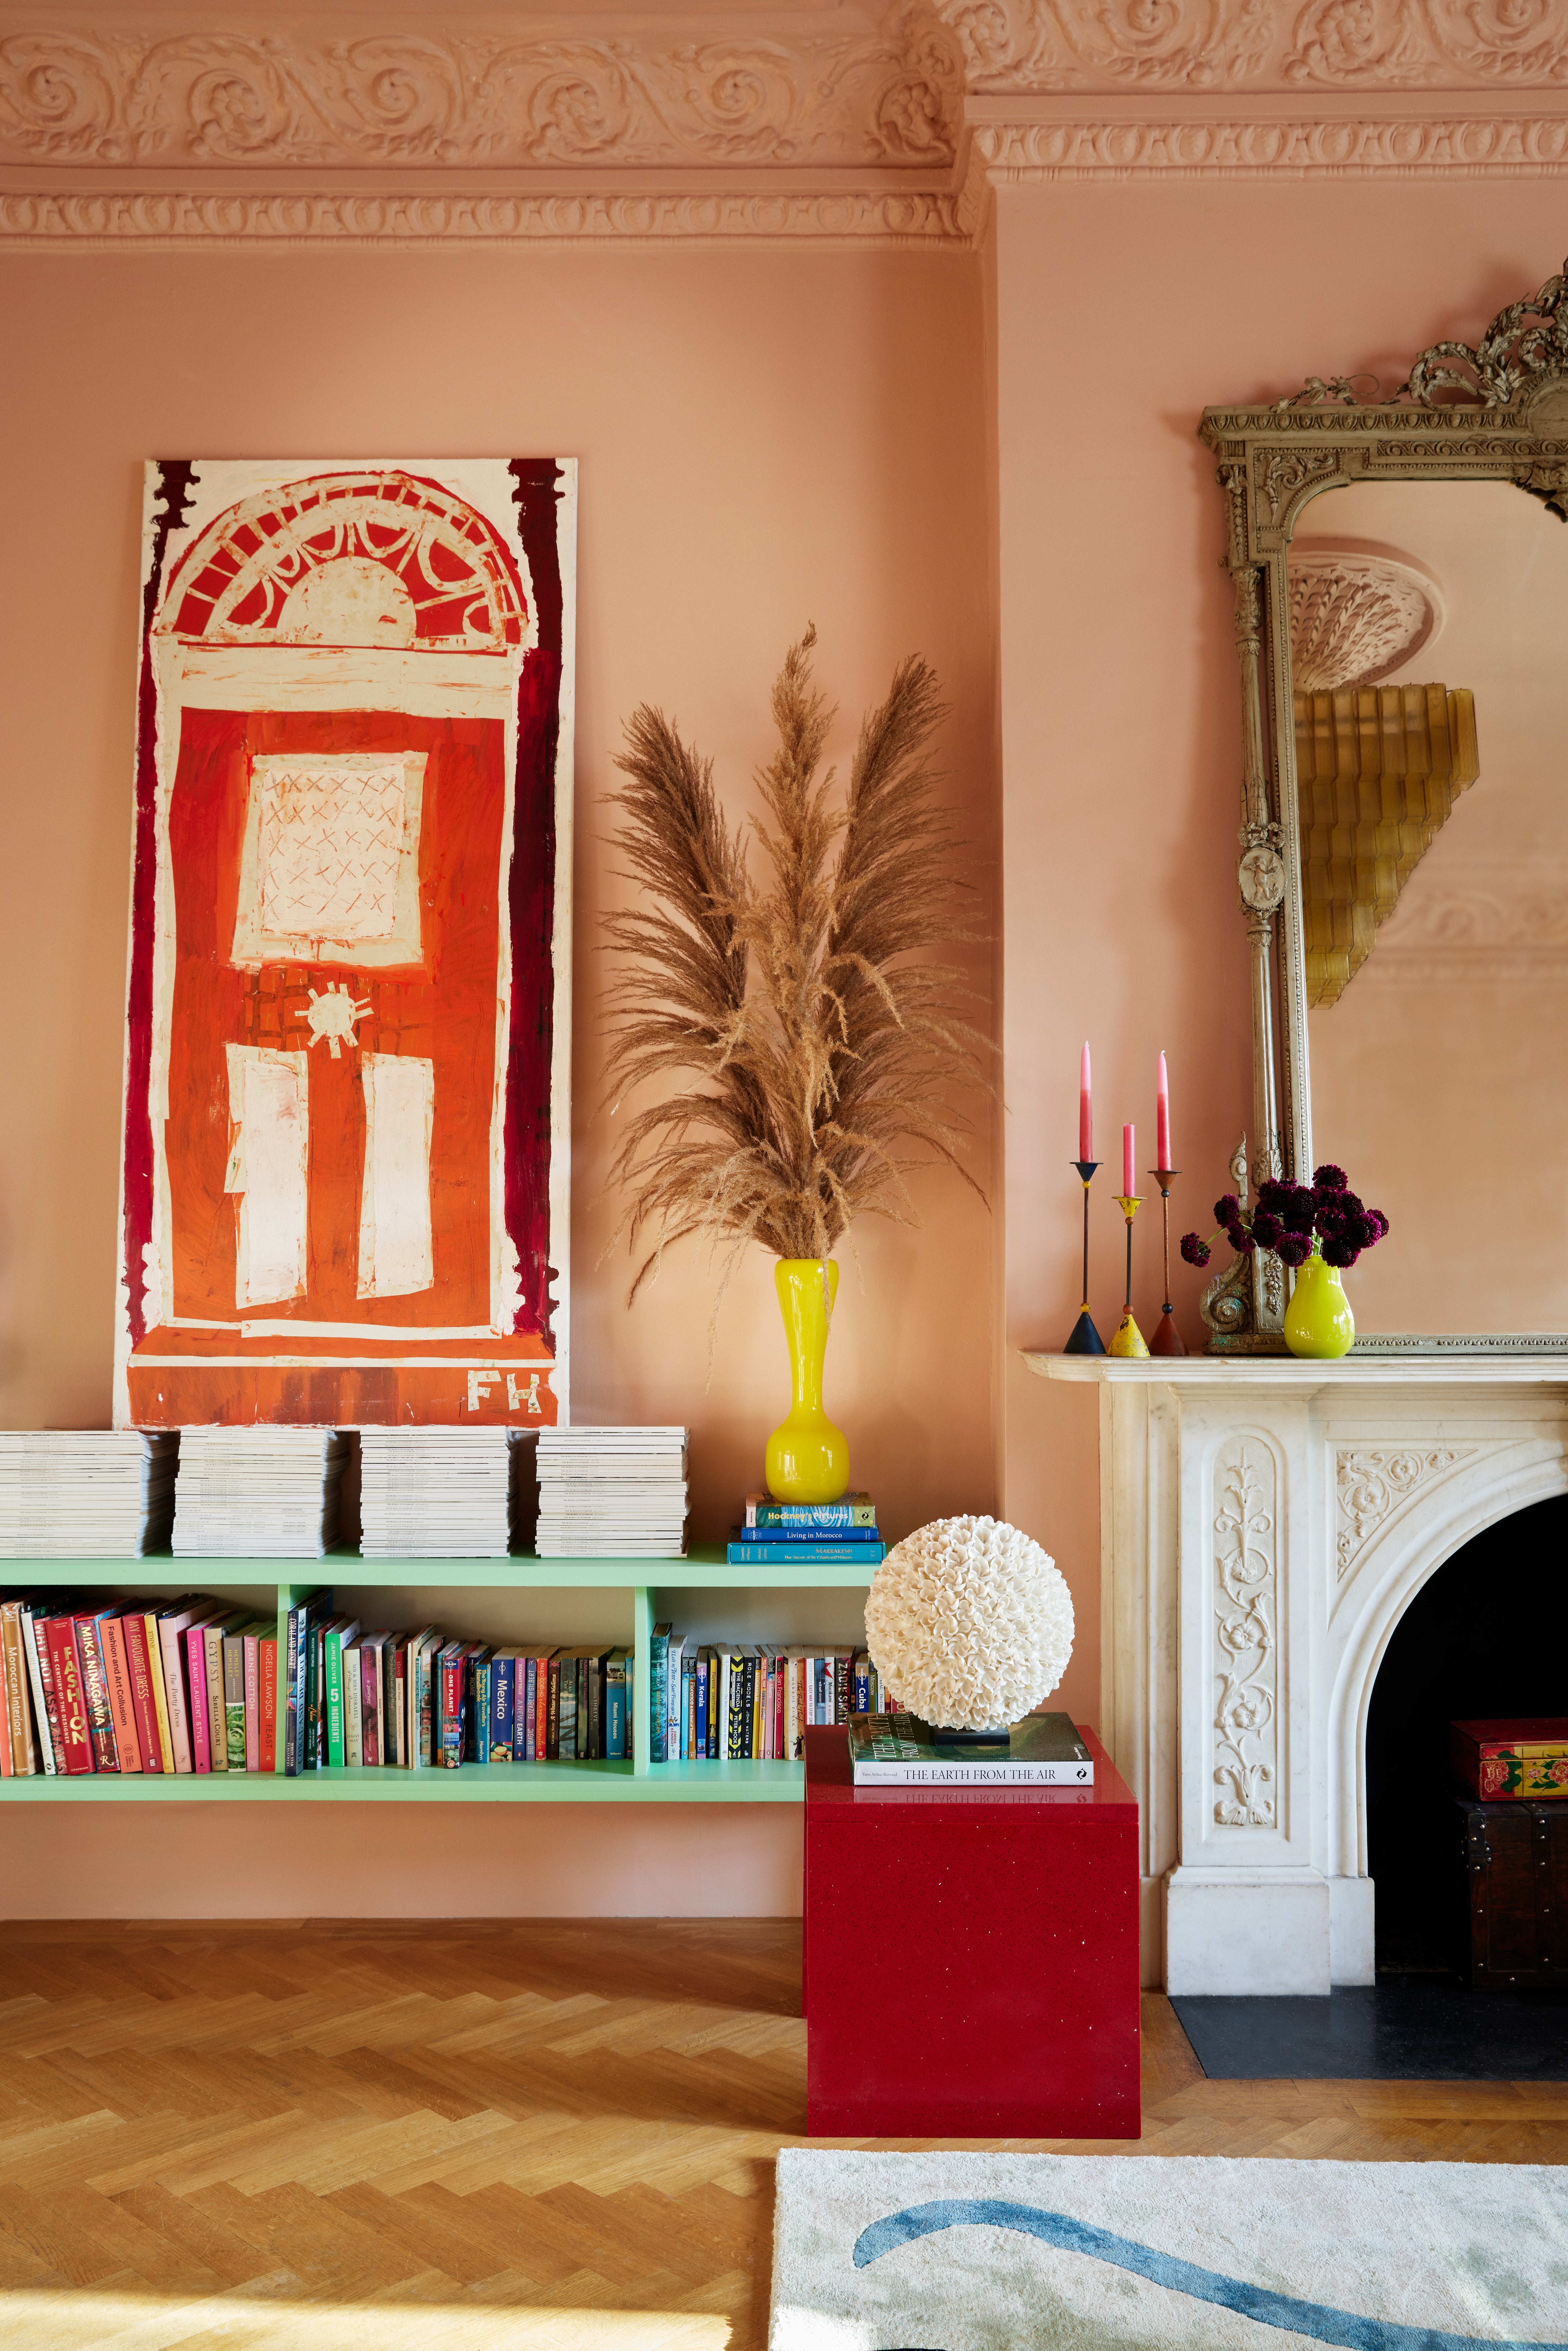 Matthew Williamson recommends using red to highlight an accessory or piece of furniture